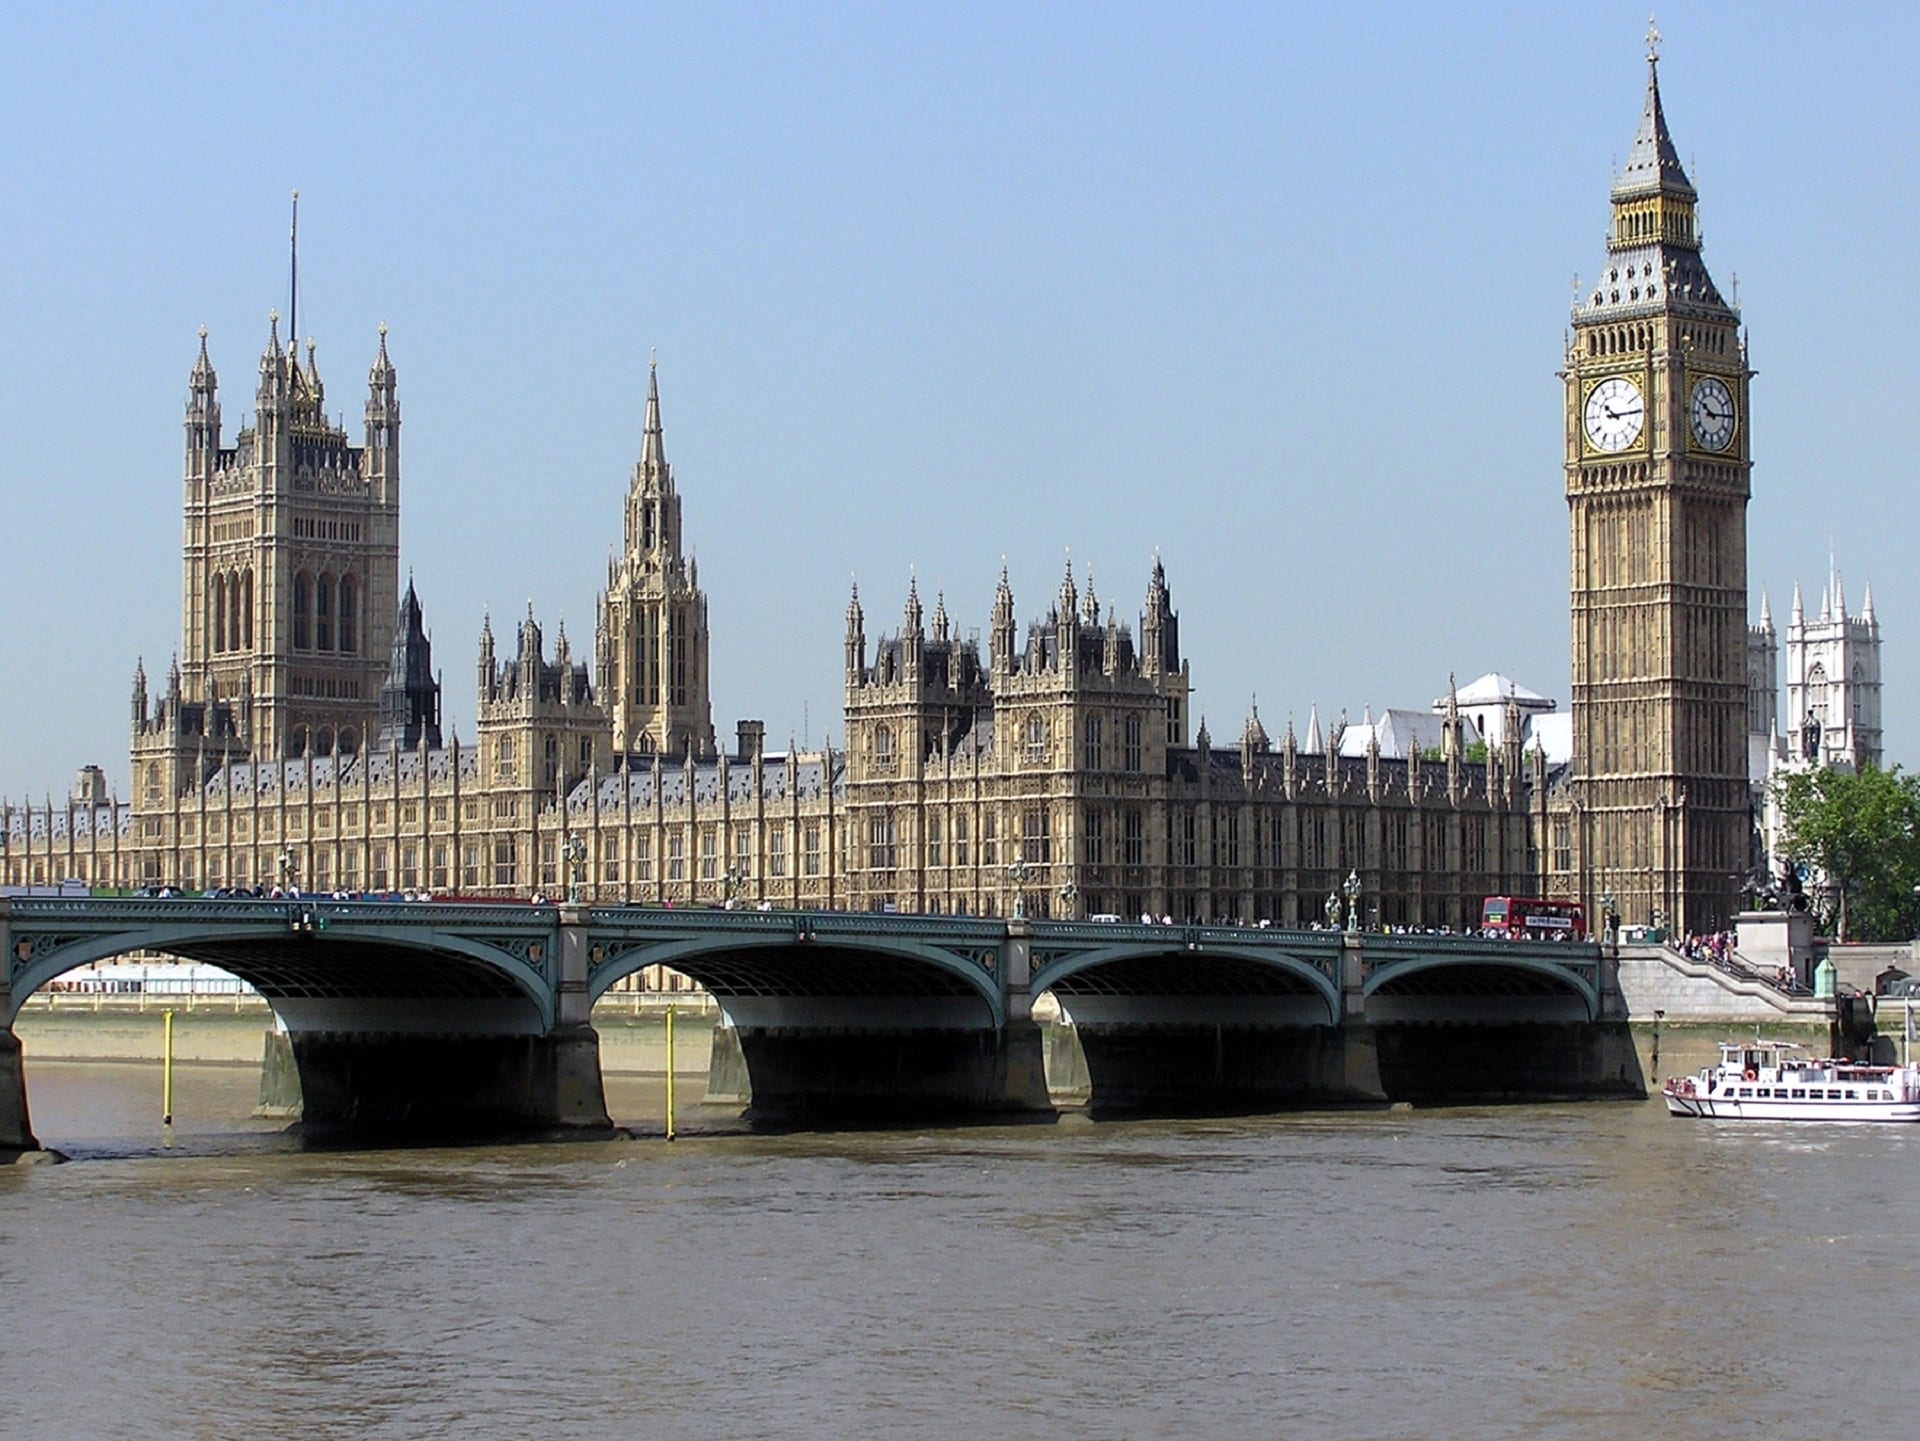 Photograph of Westminster from across the river showing Big Ben and parliament buildings